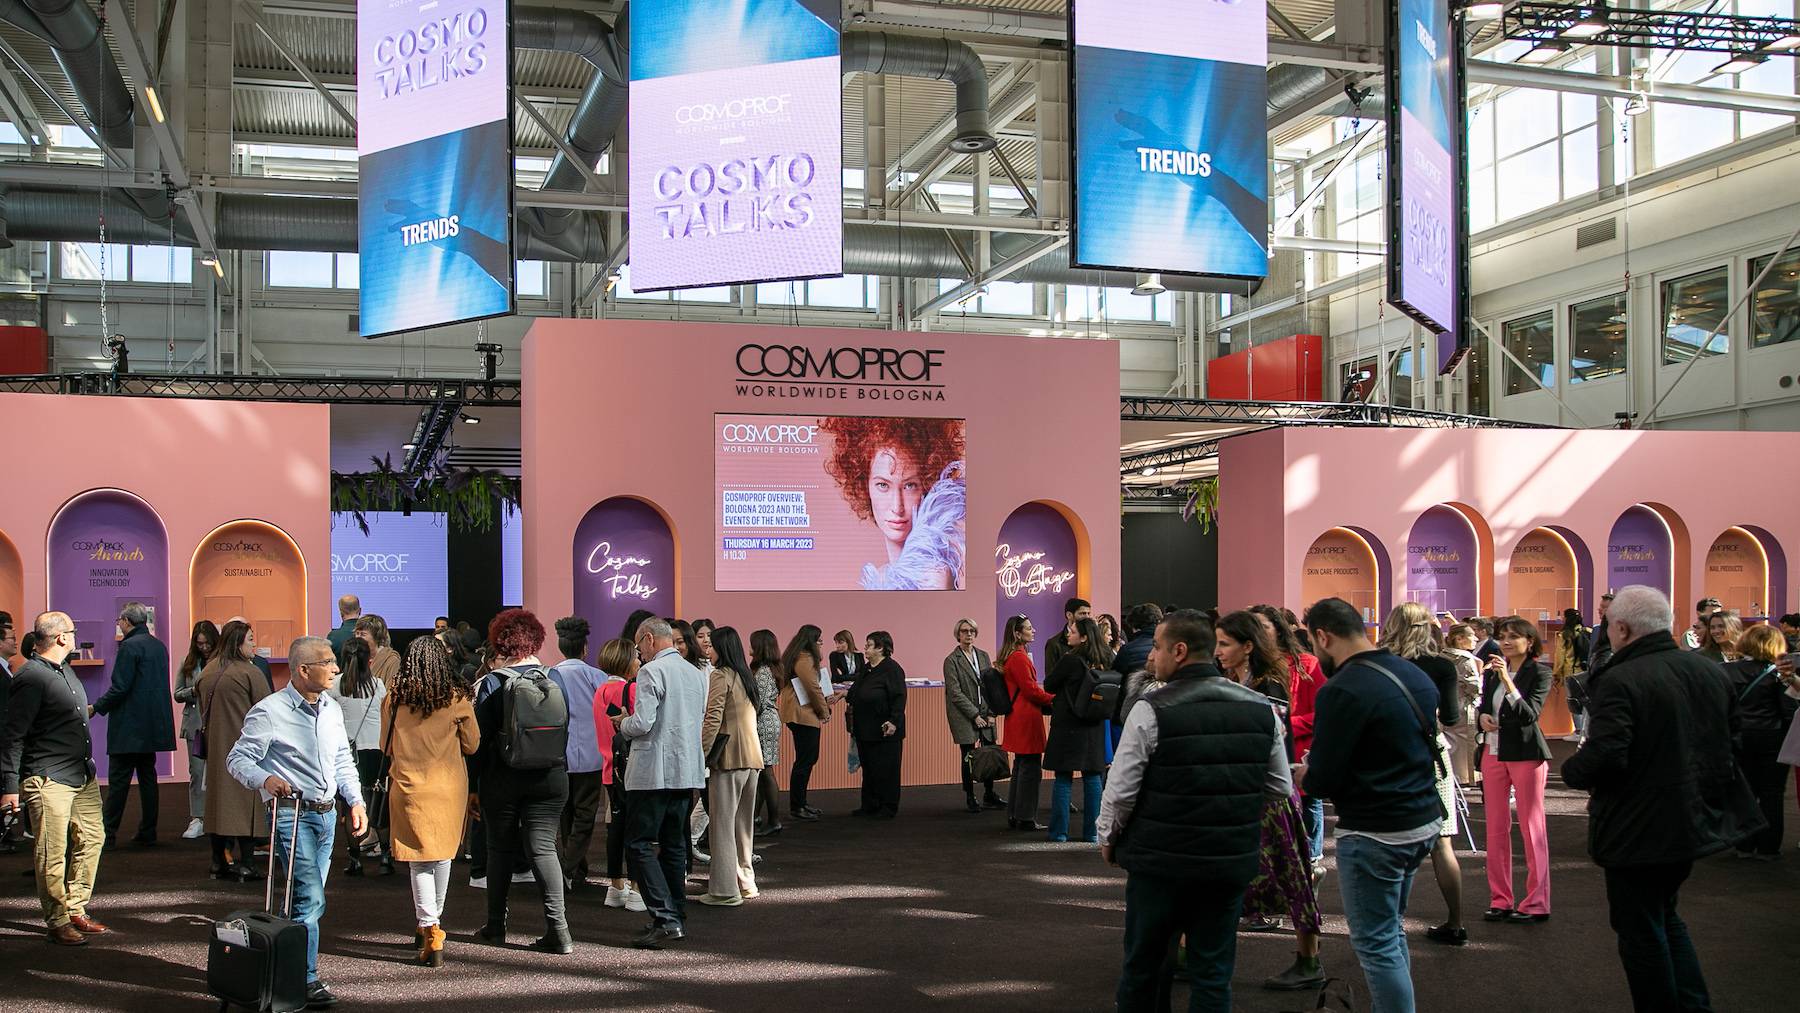 Attendees on the show floor of Cosmoprof Worldwide in Bologna.